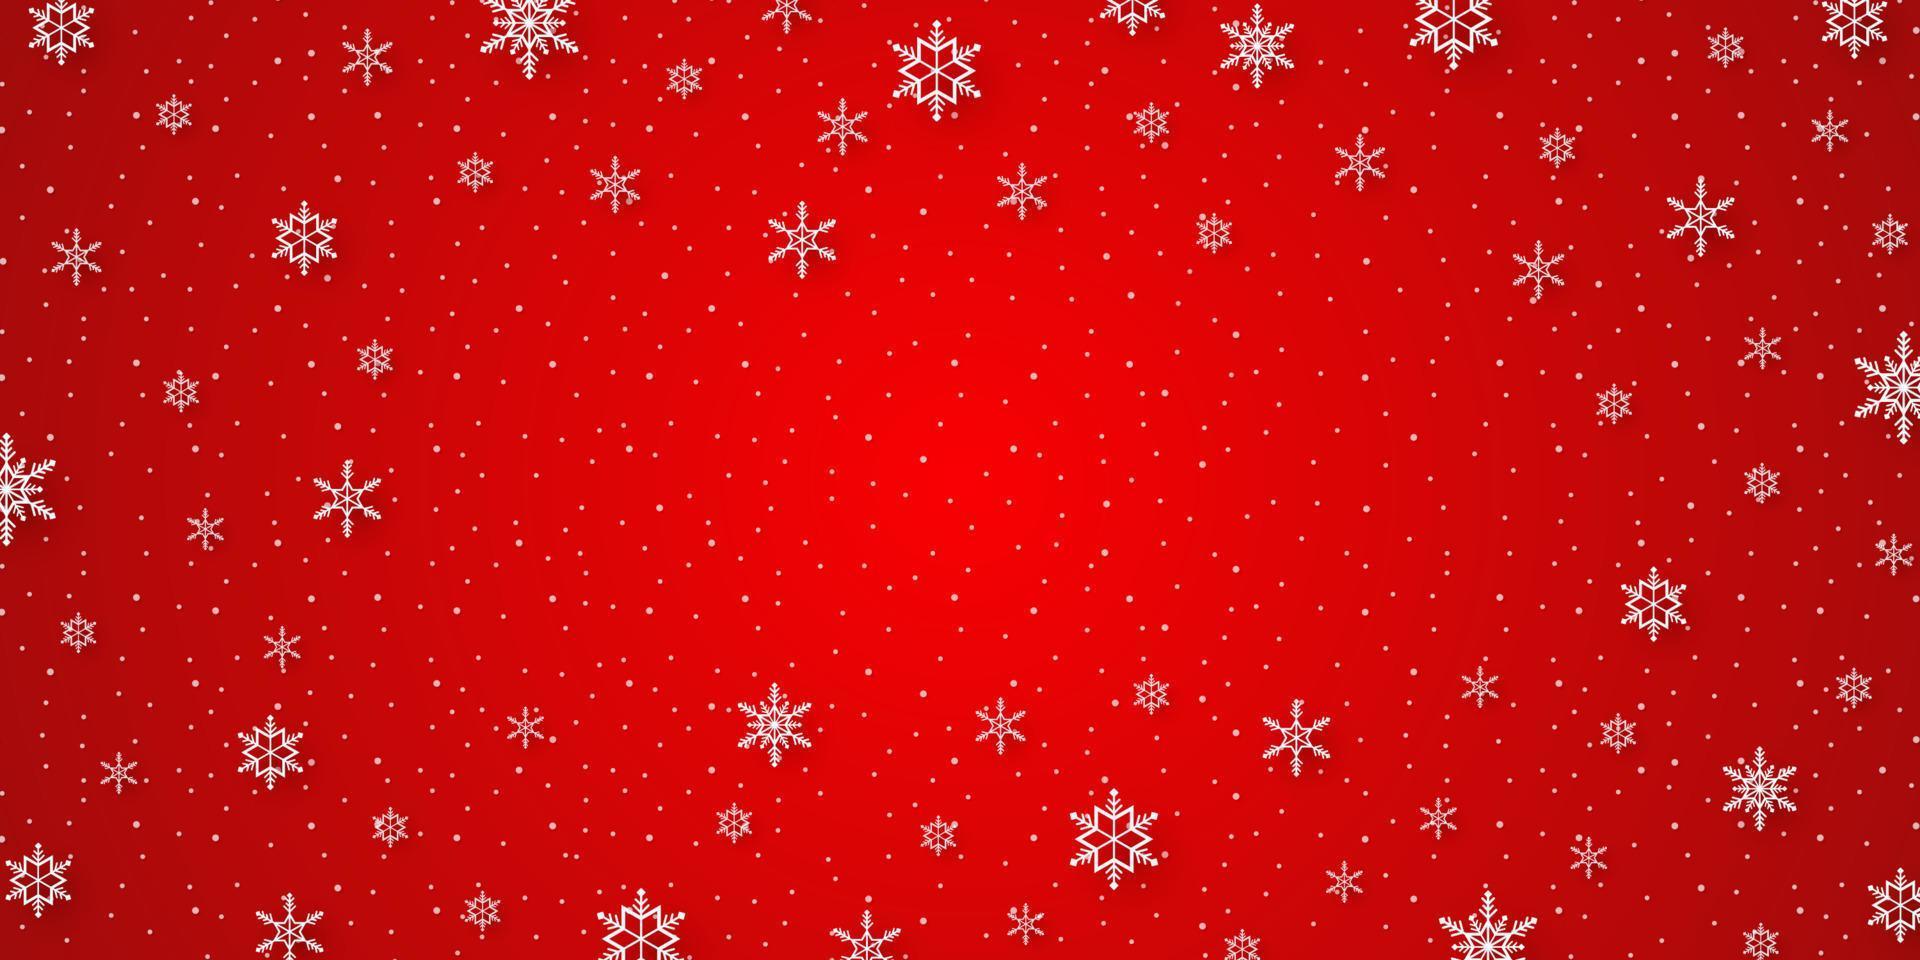 Merry Christmas, snowflakes and snowfall with red background in paper art style vector